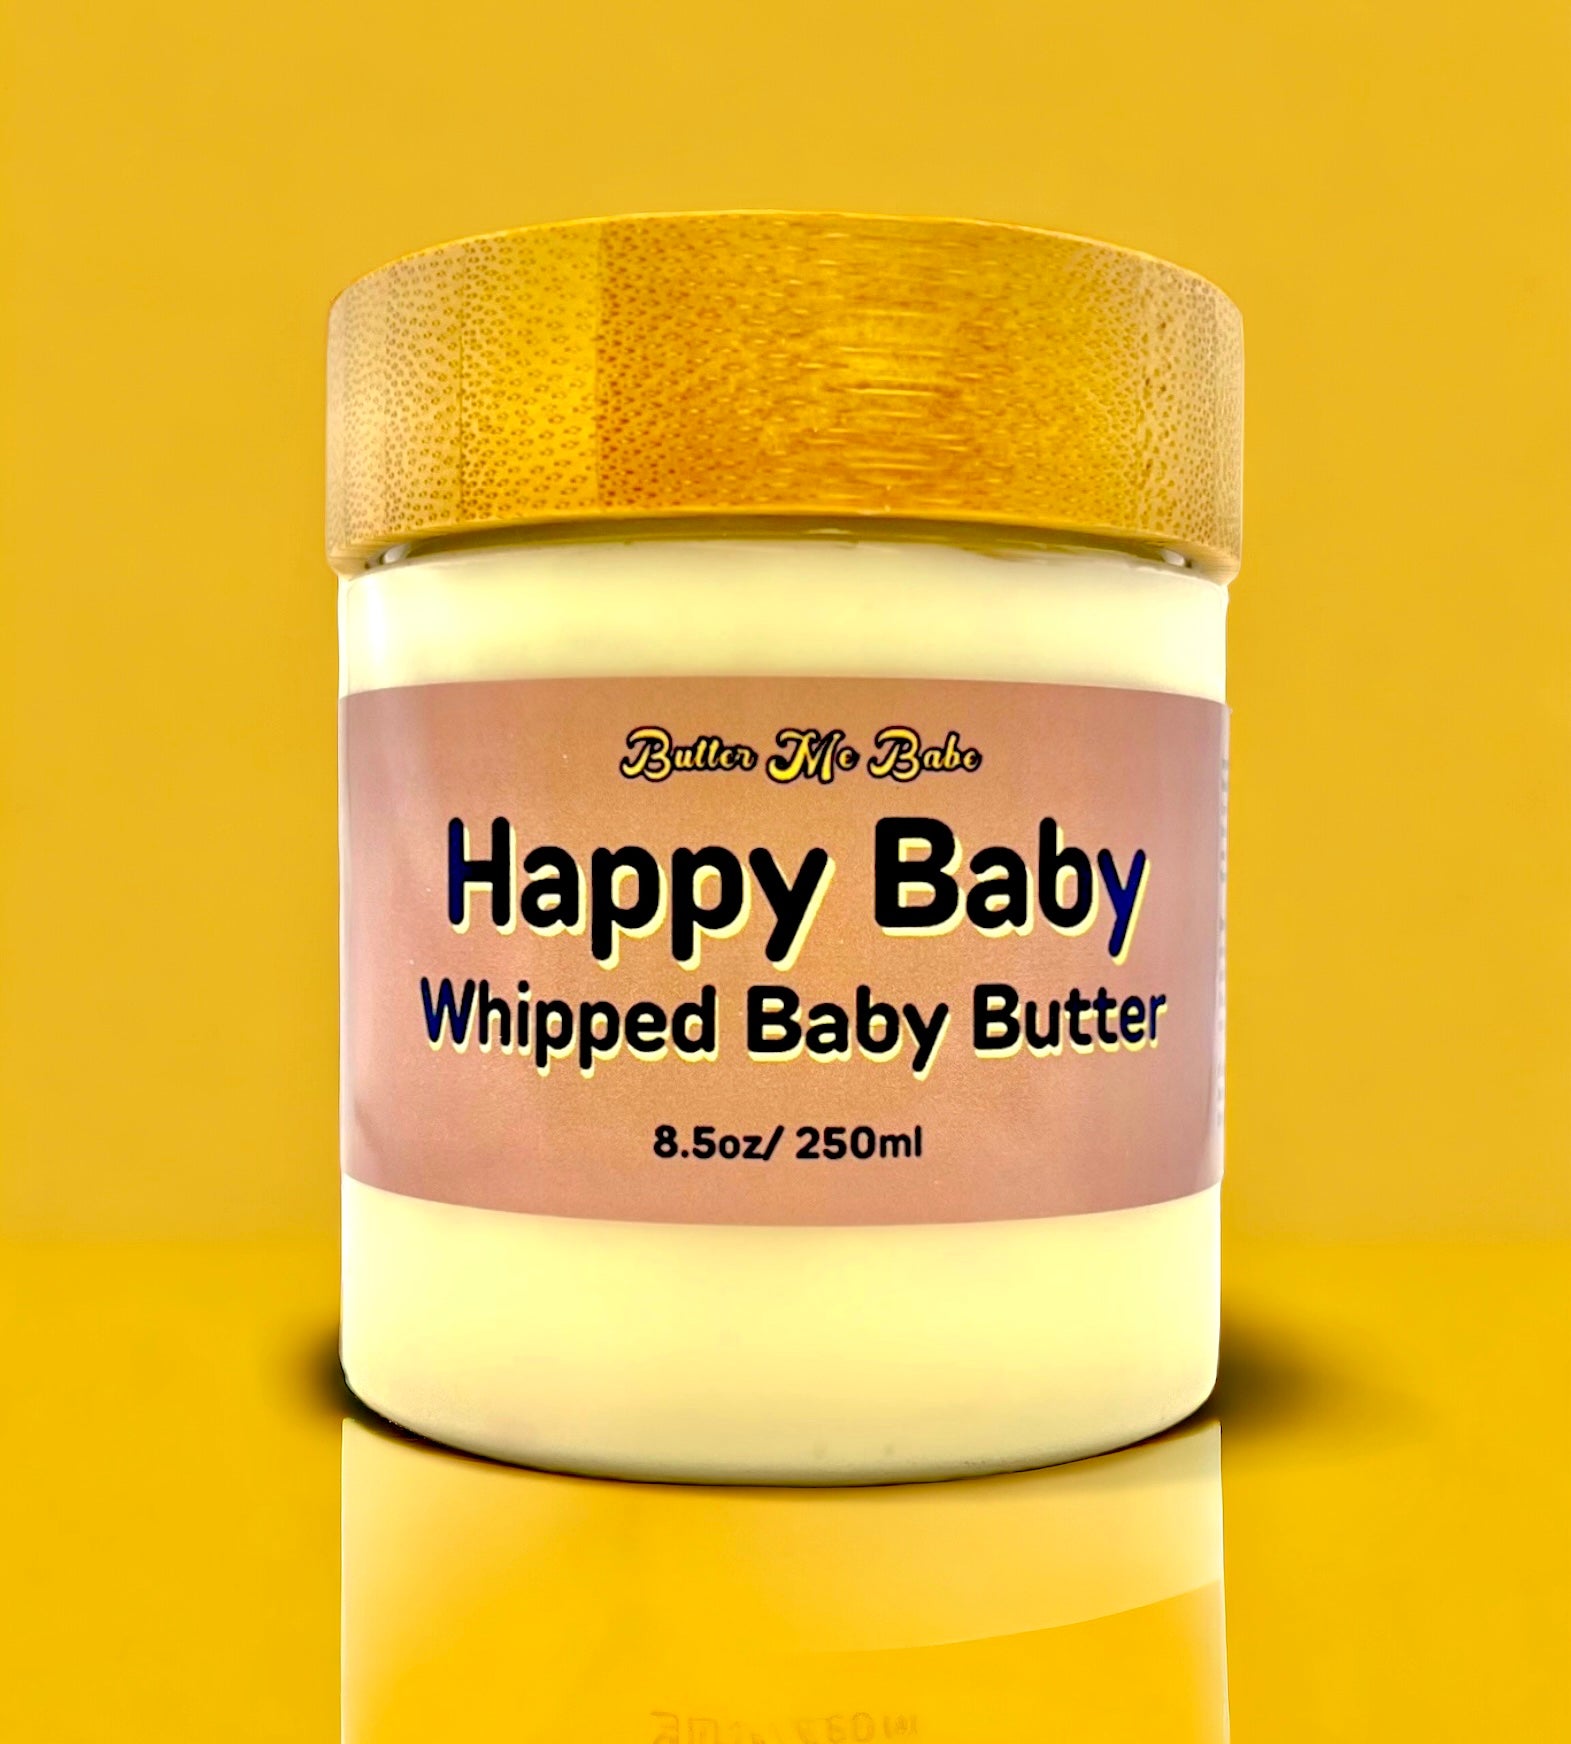 Happy Baby Whipped Baby Butter